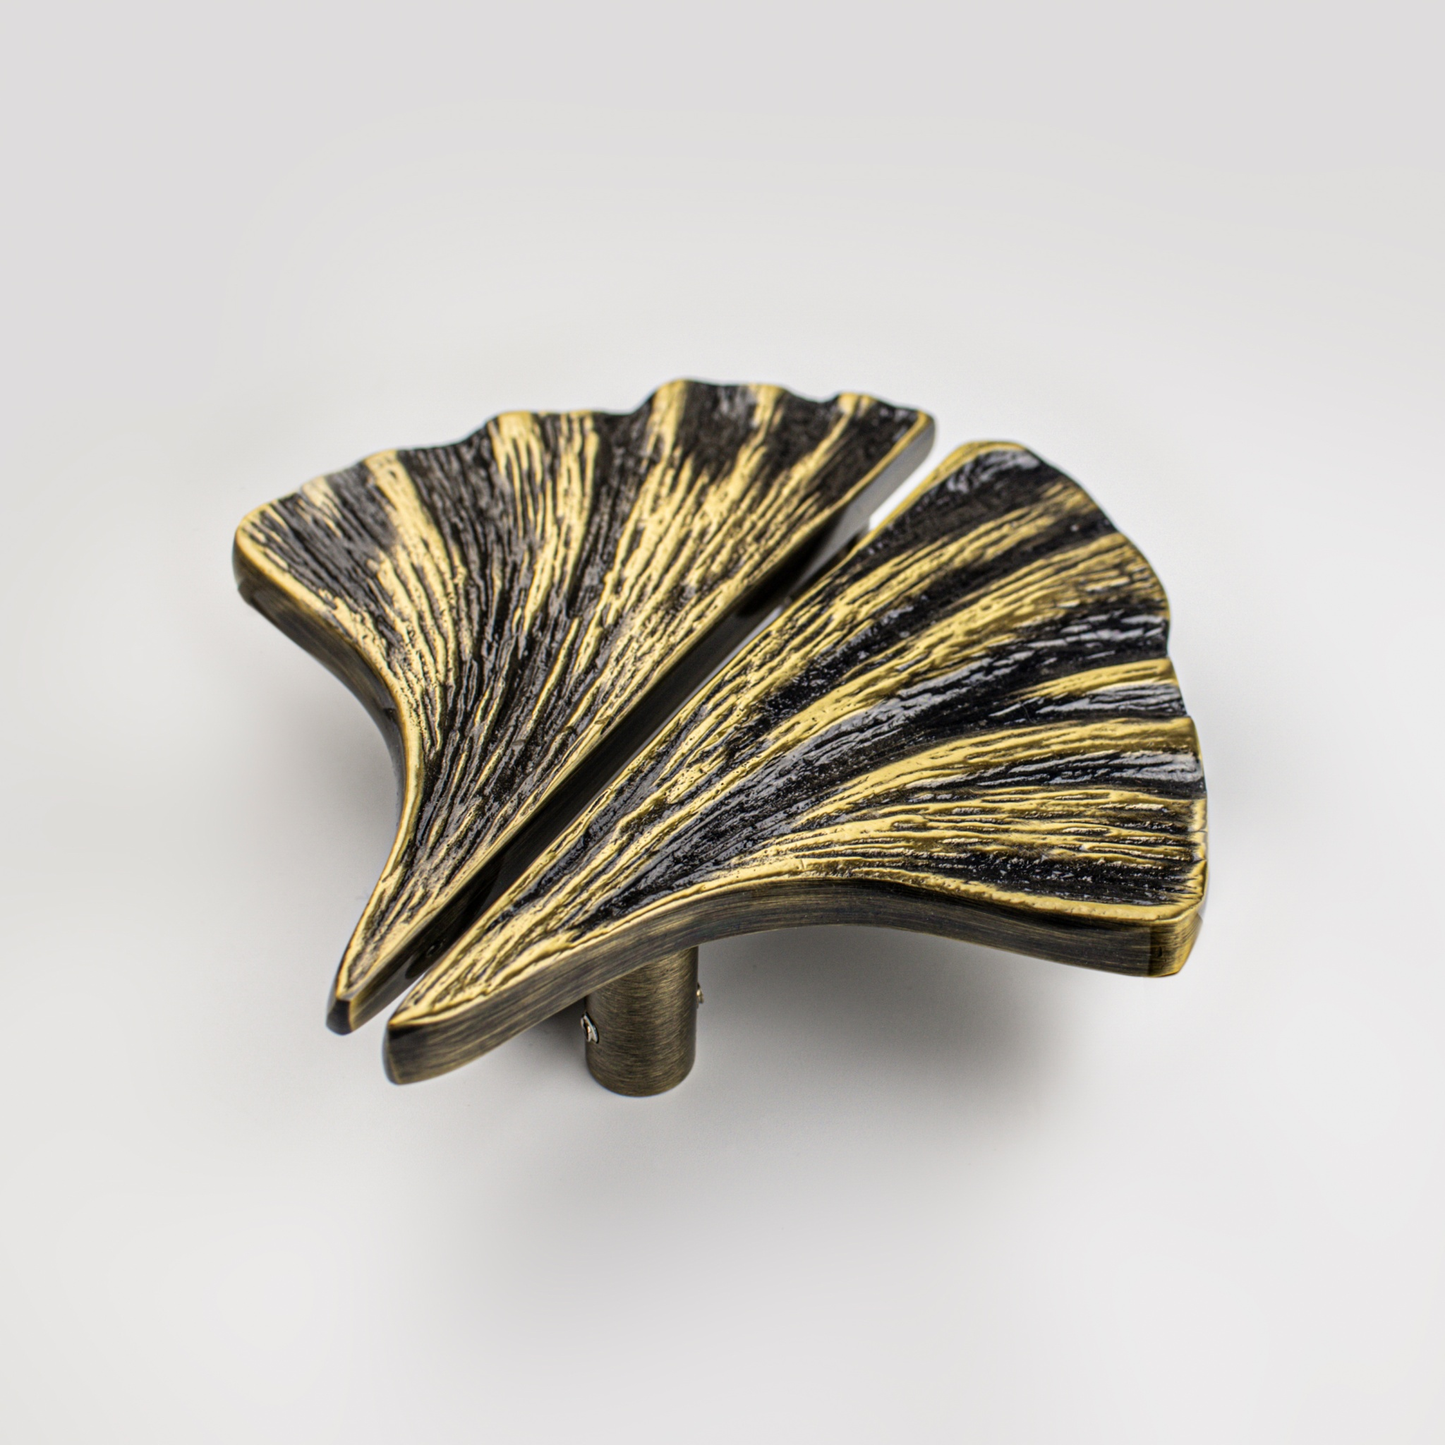 Gingko, Solid Brass Door Pulls Inspired by the timeliness of nature, Gingko is wispy, yet substantial. Gingko is so versatile, it can be installed side-by-side as a pair on cabinets, horizontally Door HandlesGingko, Solid Brass Large Pulls